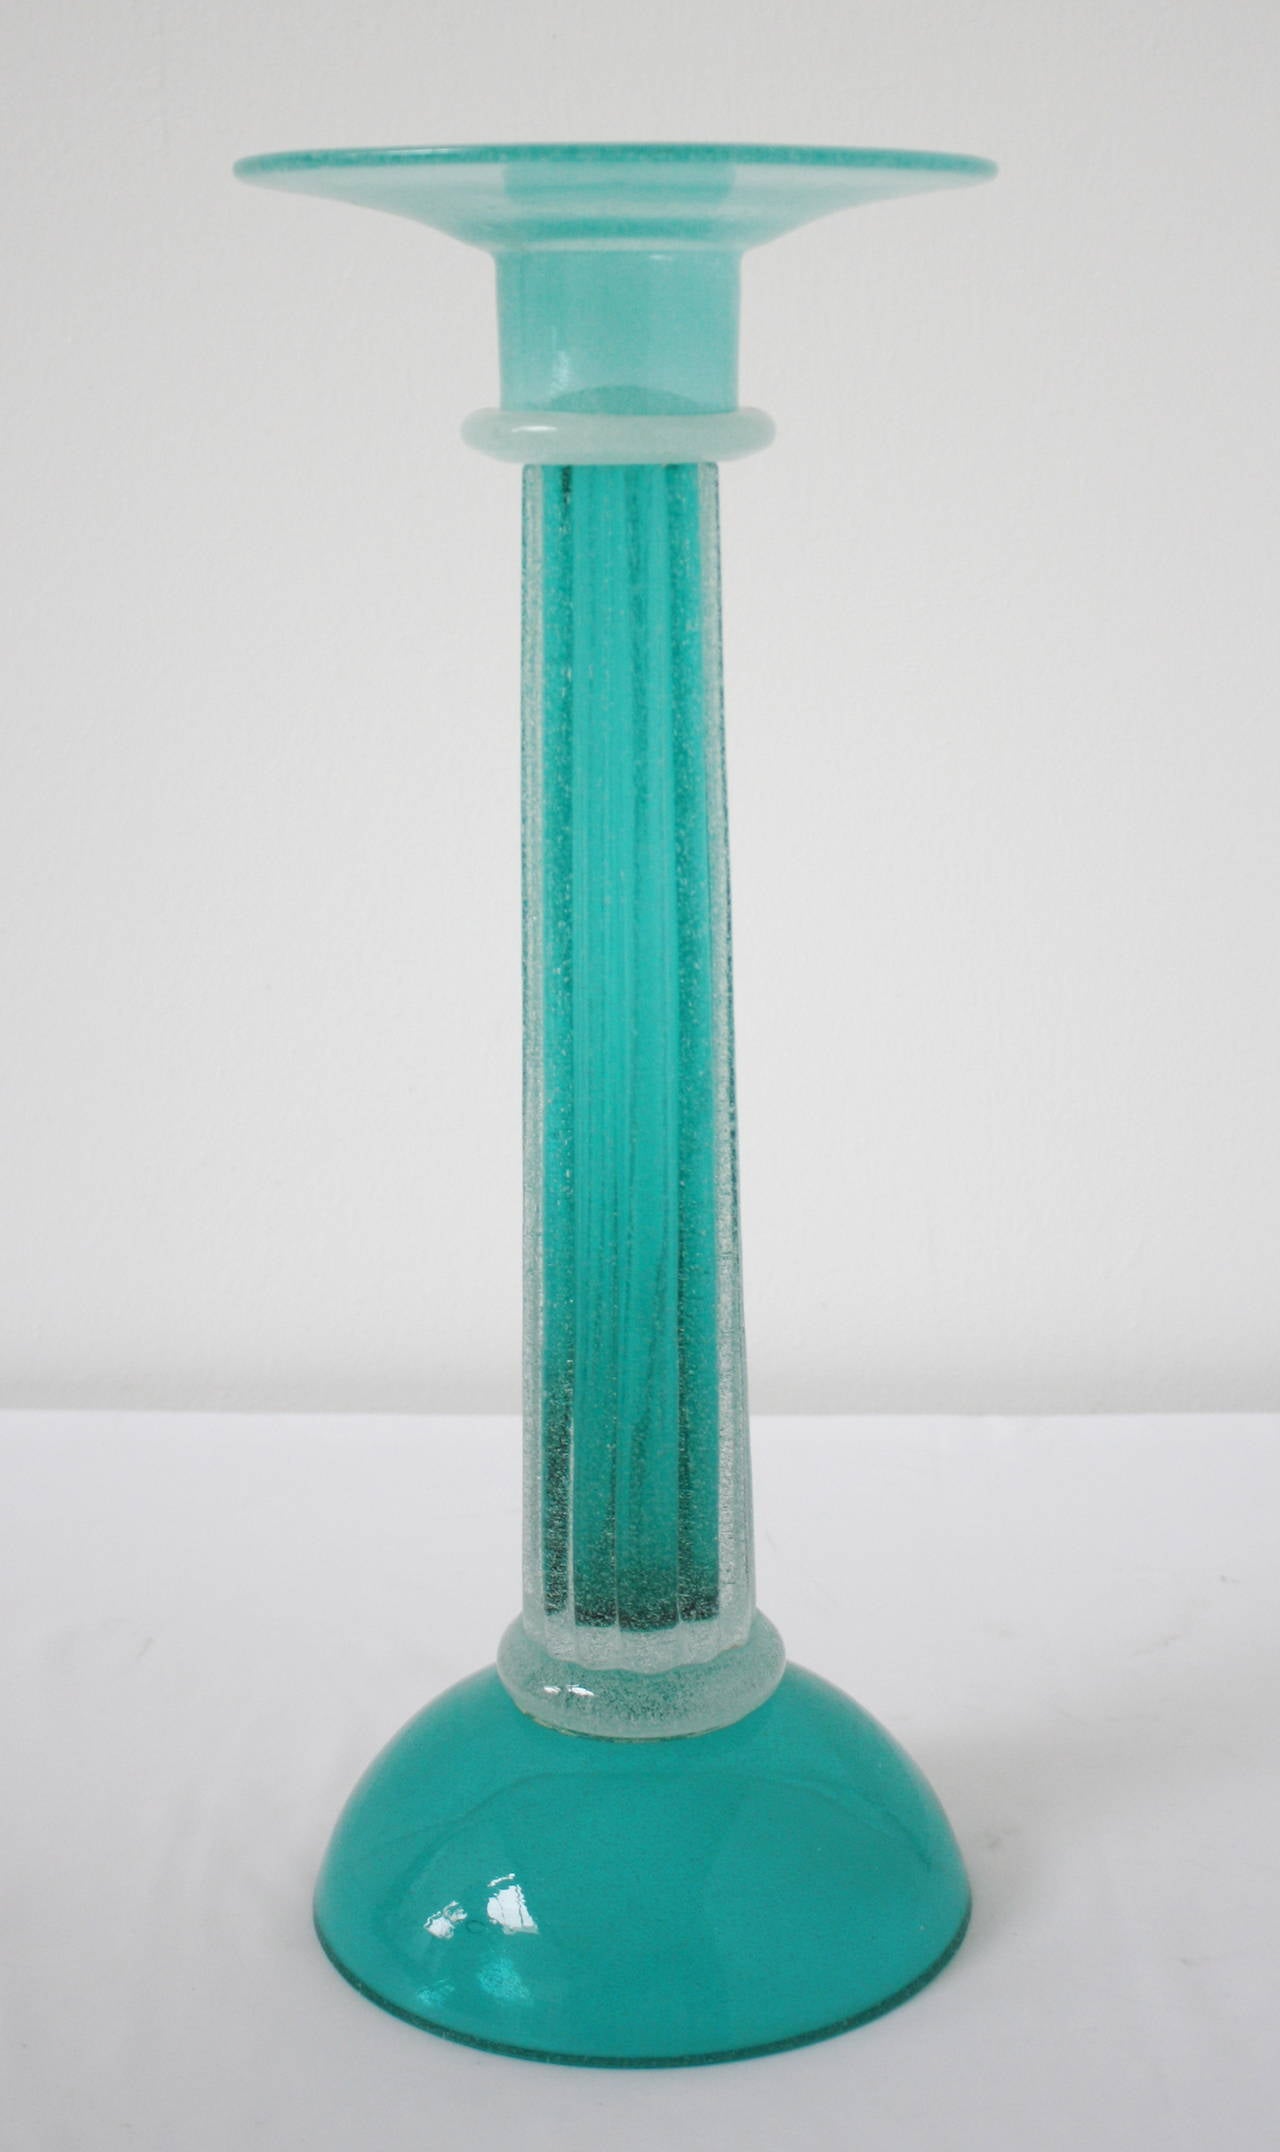 Murano glass (Italy) candleholder, turquoise glass.